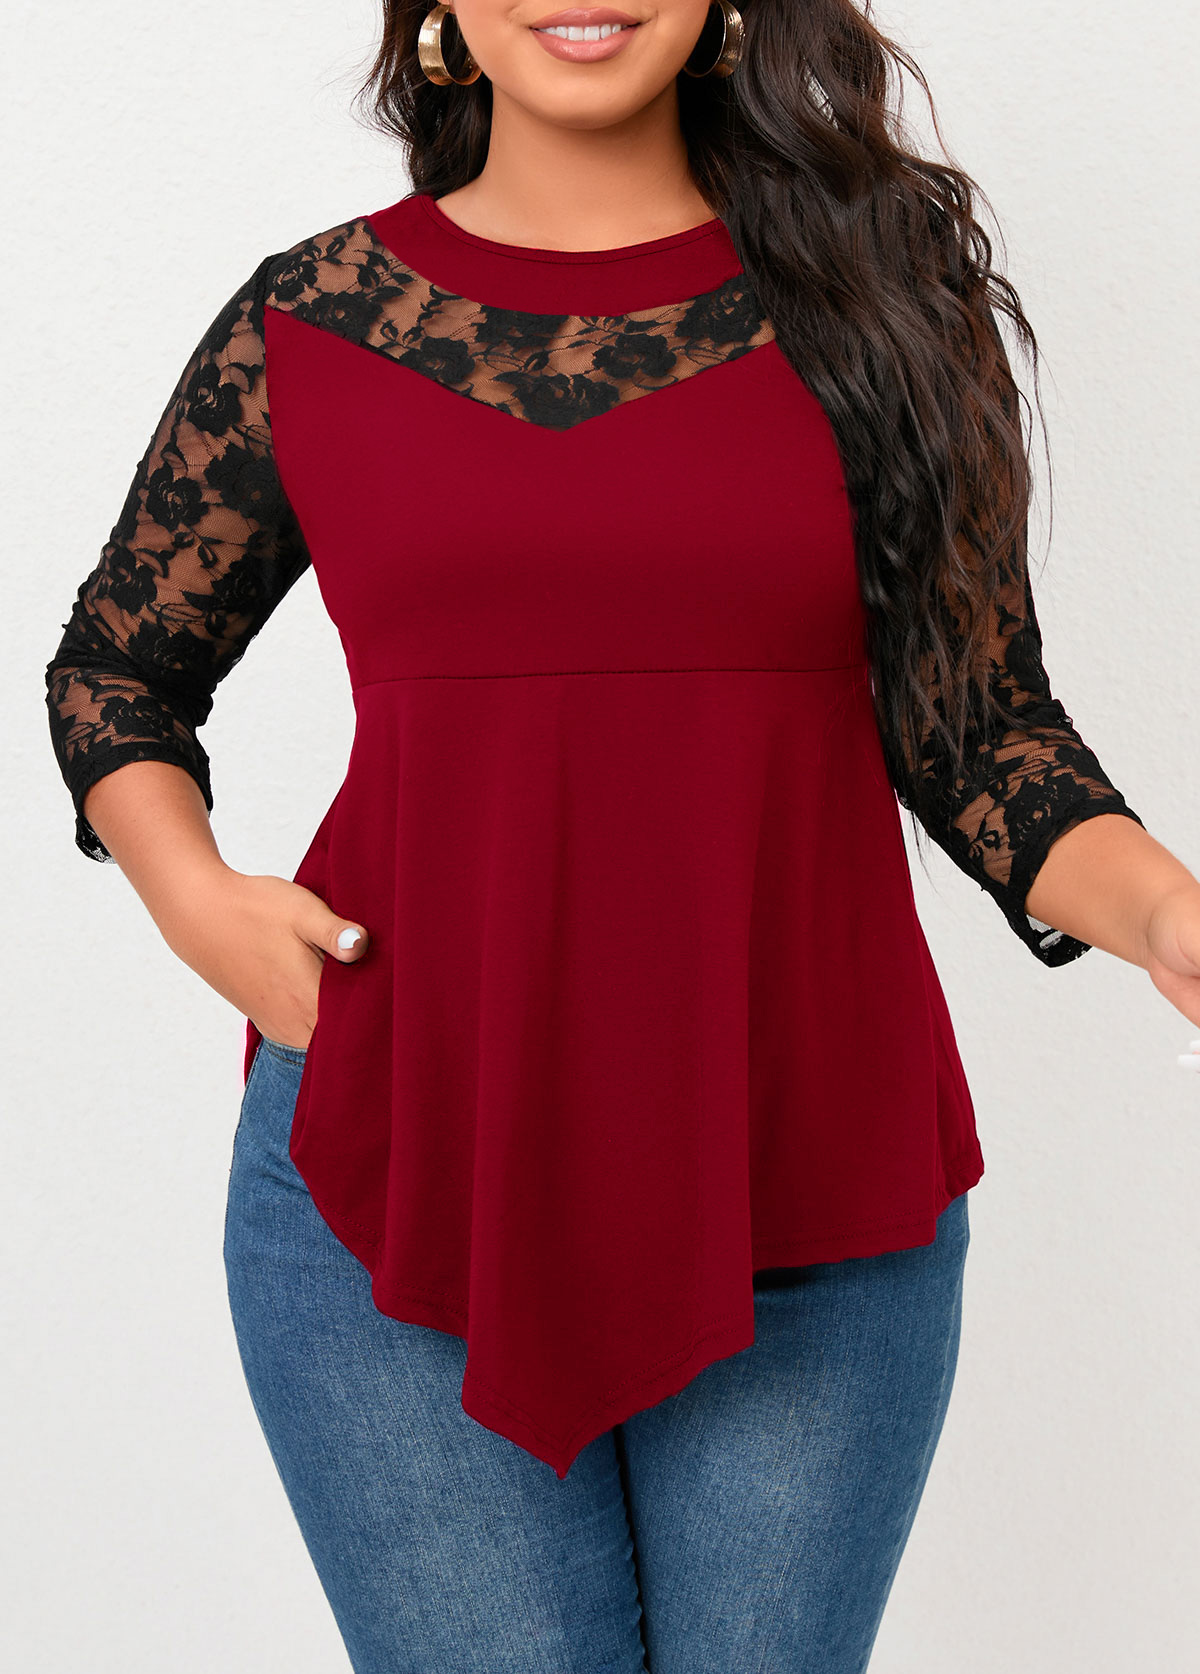 Wine Red Plus Size Lace T Shirt